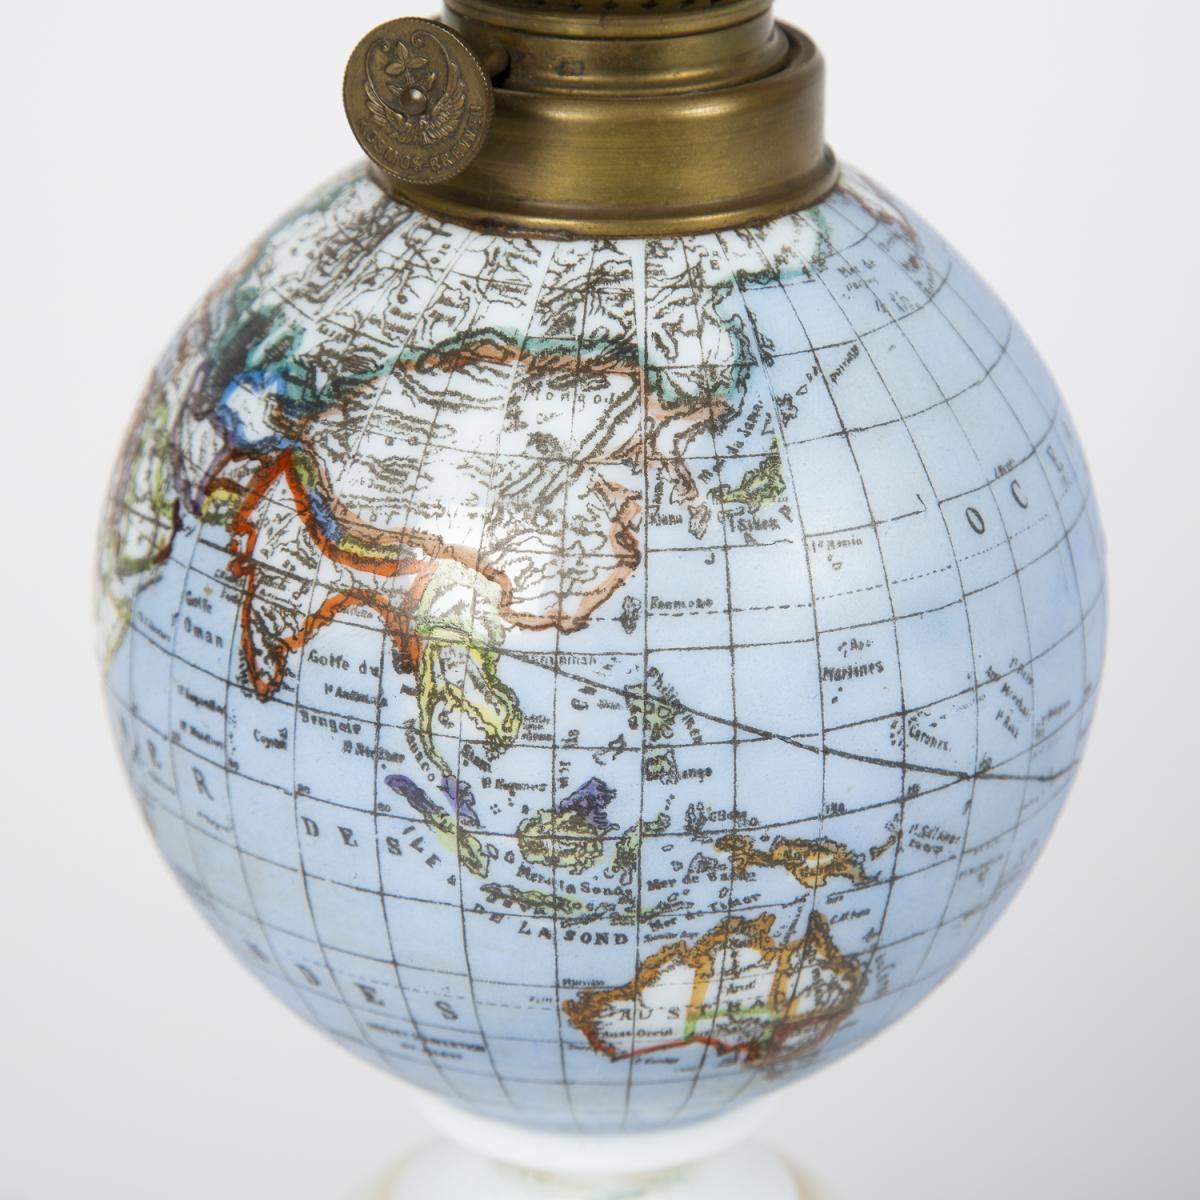 Oil Lamp with Global Shade, circa 1885